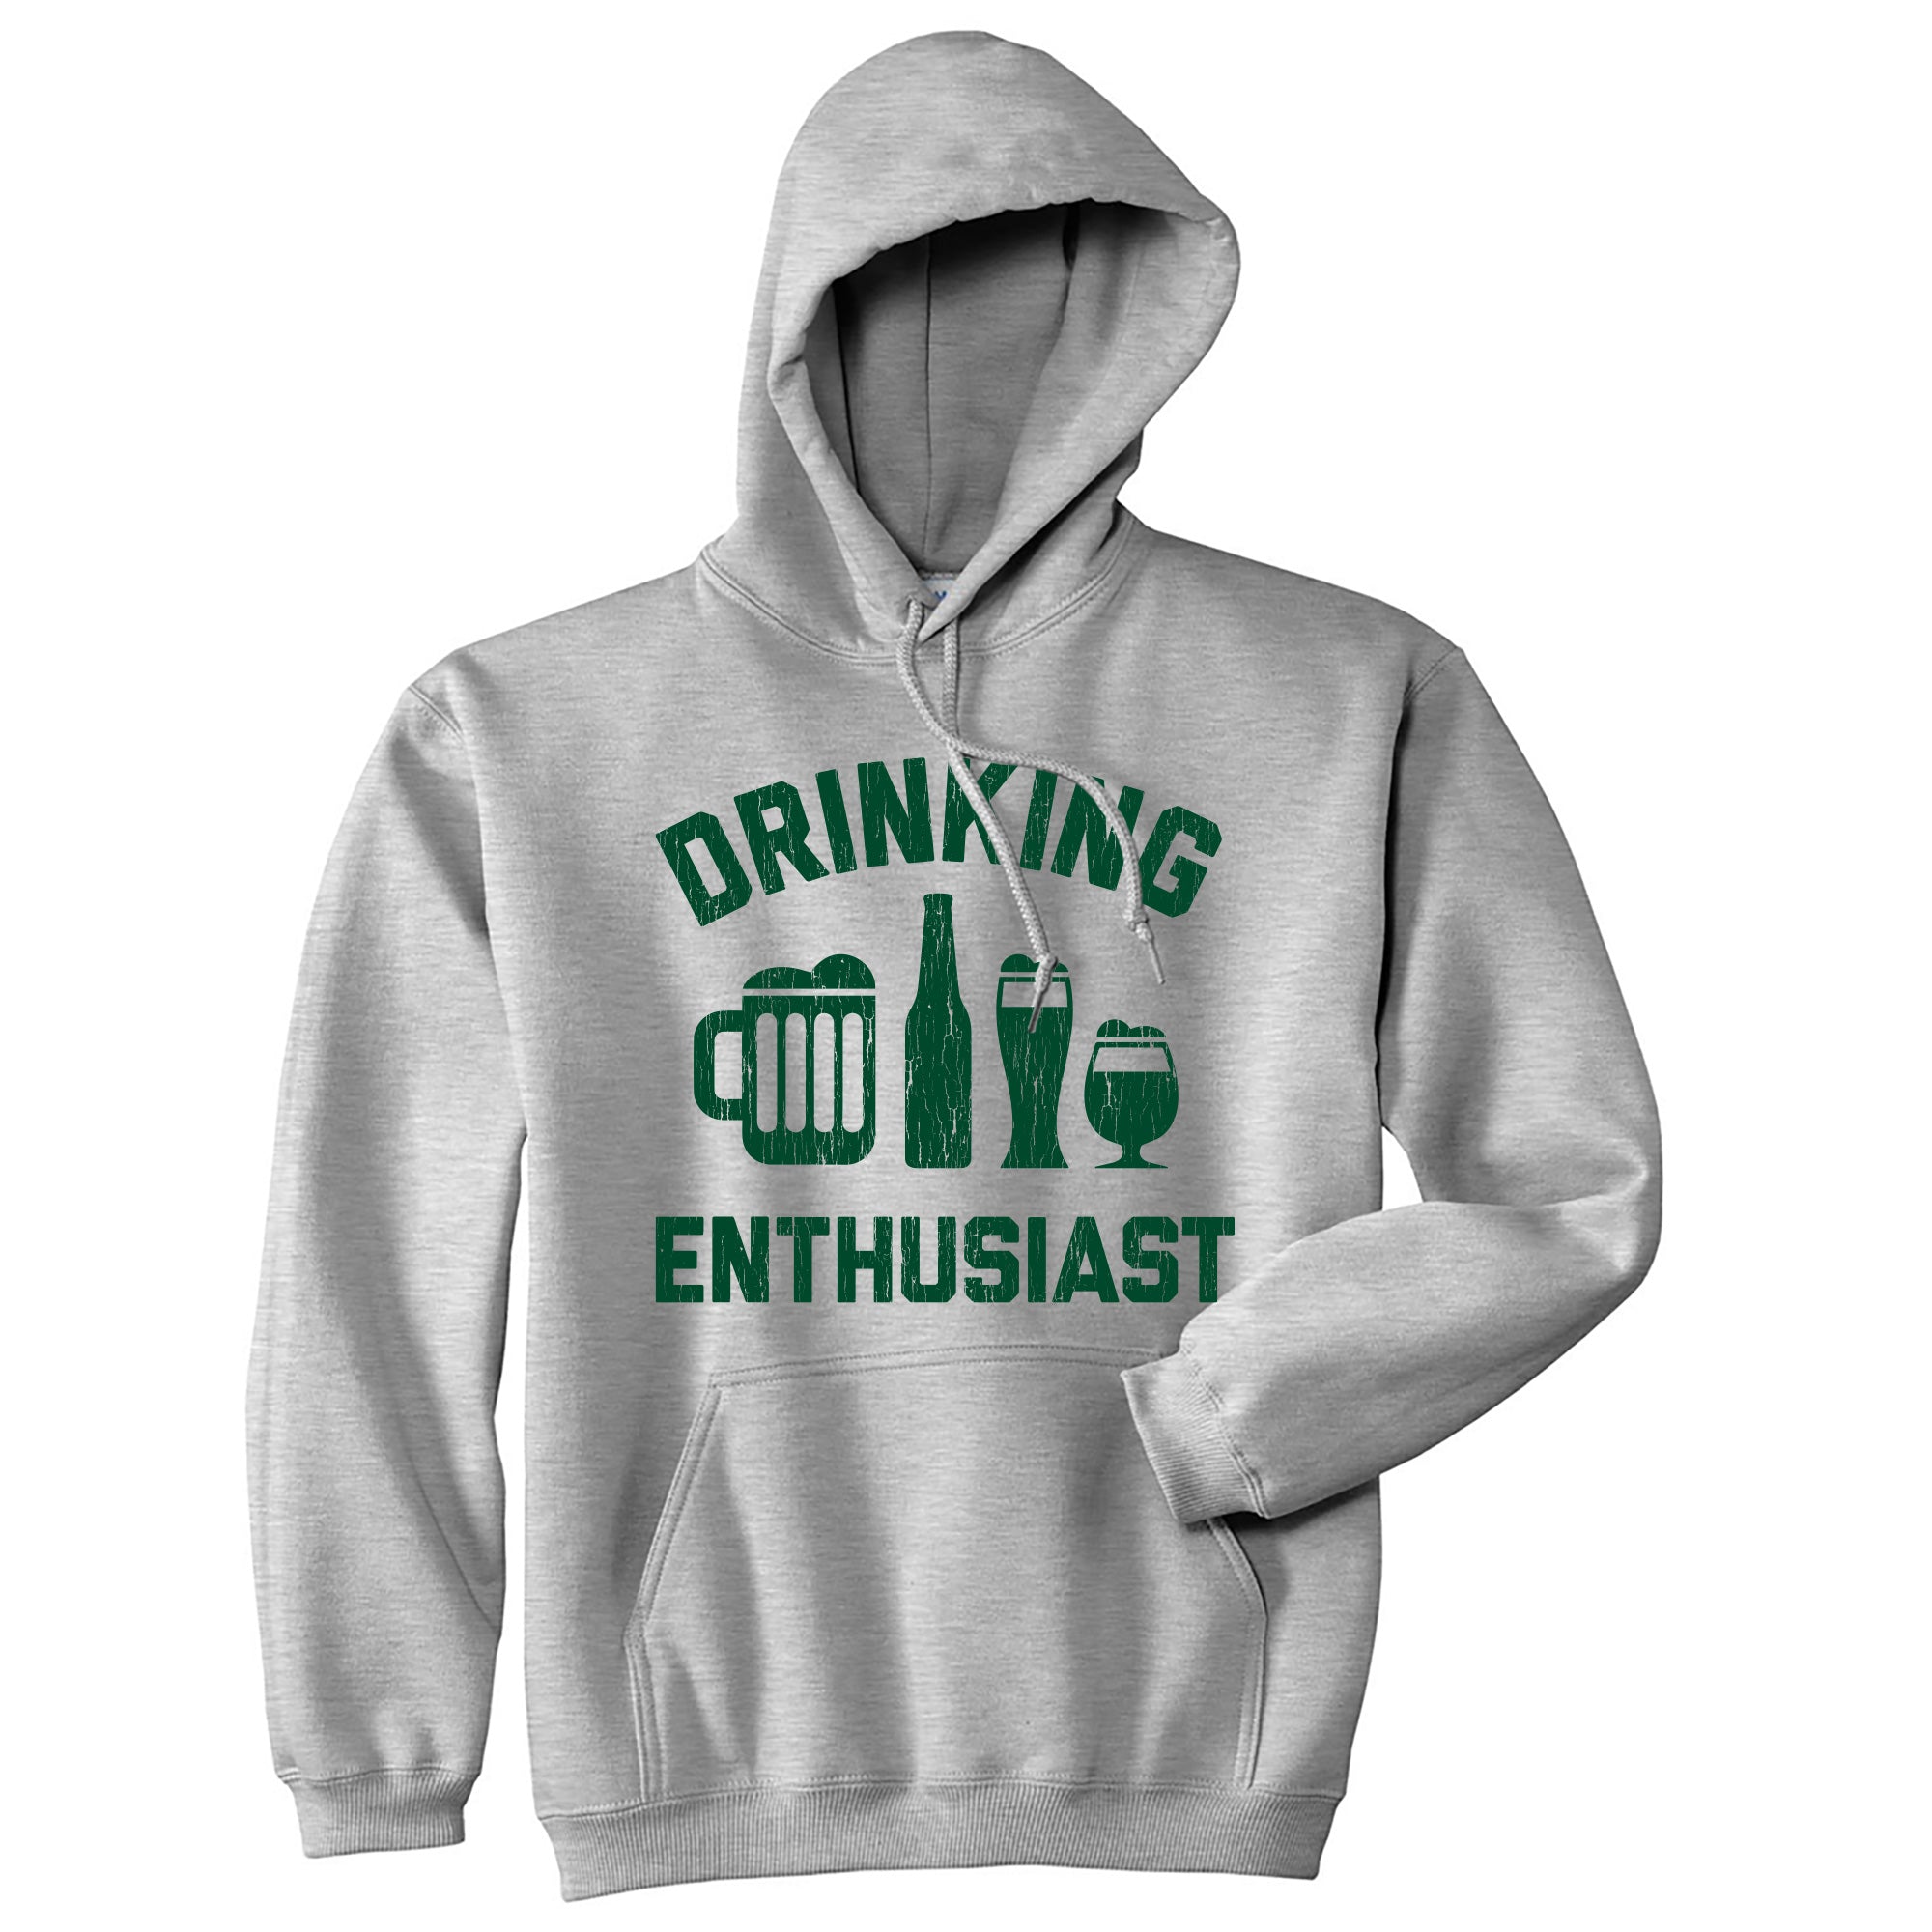 Funny Light Heather Grey - ENTHUSIAST Drinking Enthusiast Hoodie Nerdy Saint Patrick's Day Drinking Tee